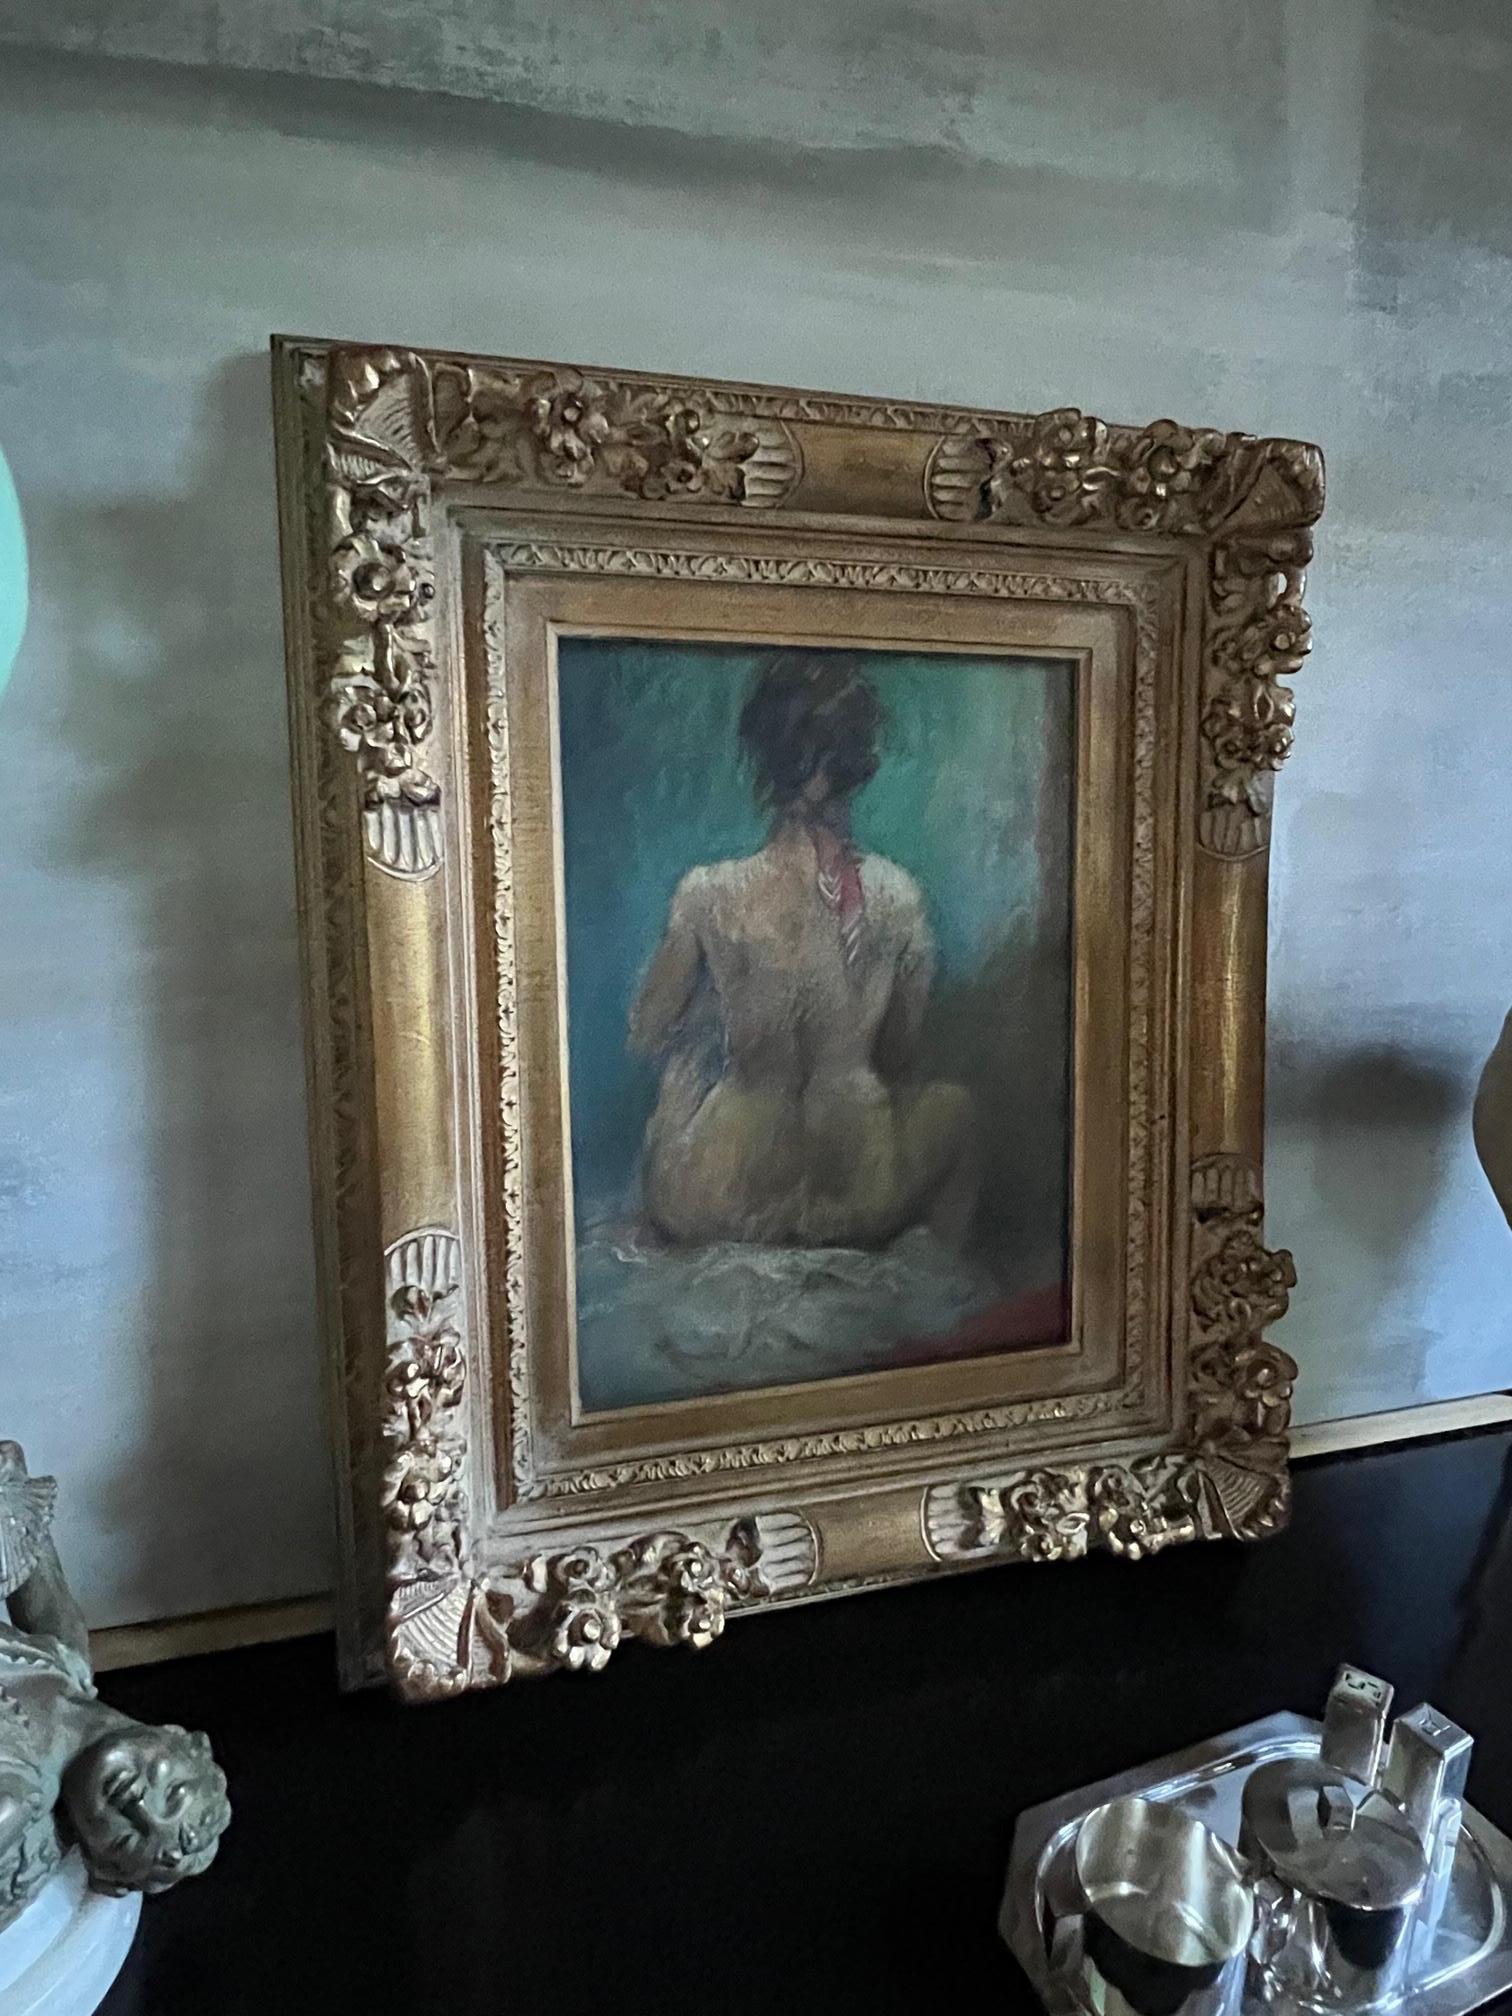 Pastel of nude female wearing only a red bandana, signed by the artist Paul F. Williams. Professionally framed in a carved wood frame painted gold and ready to hang!

Pastel by sight measures 15.25